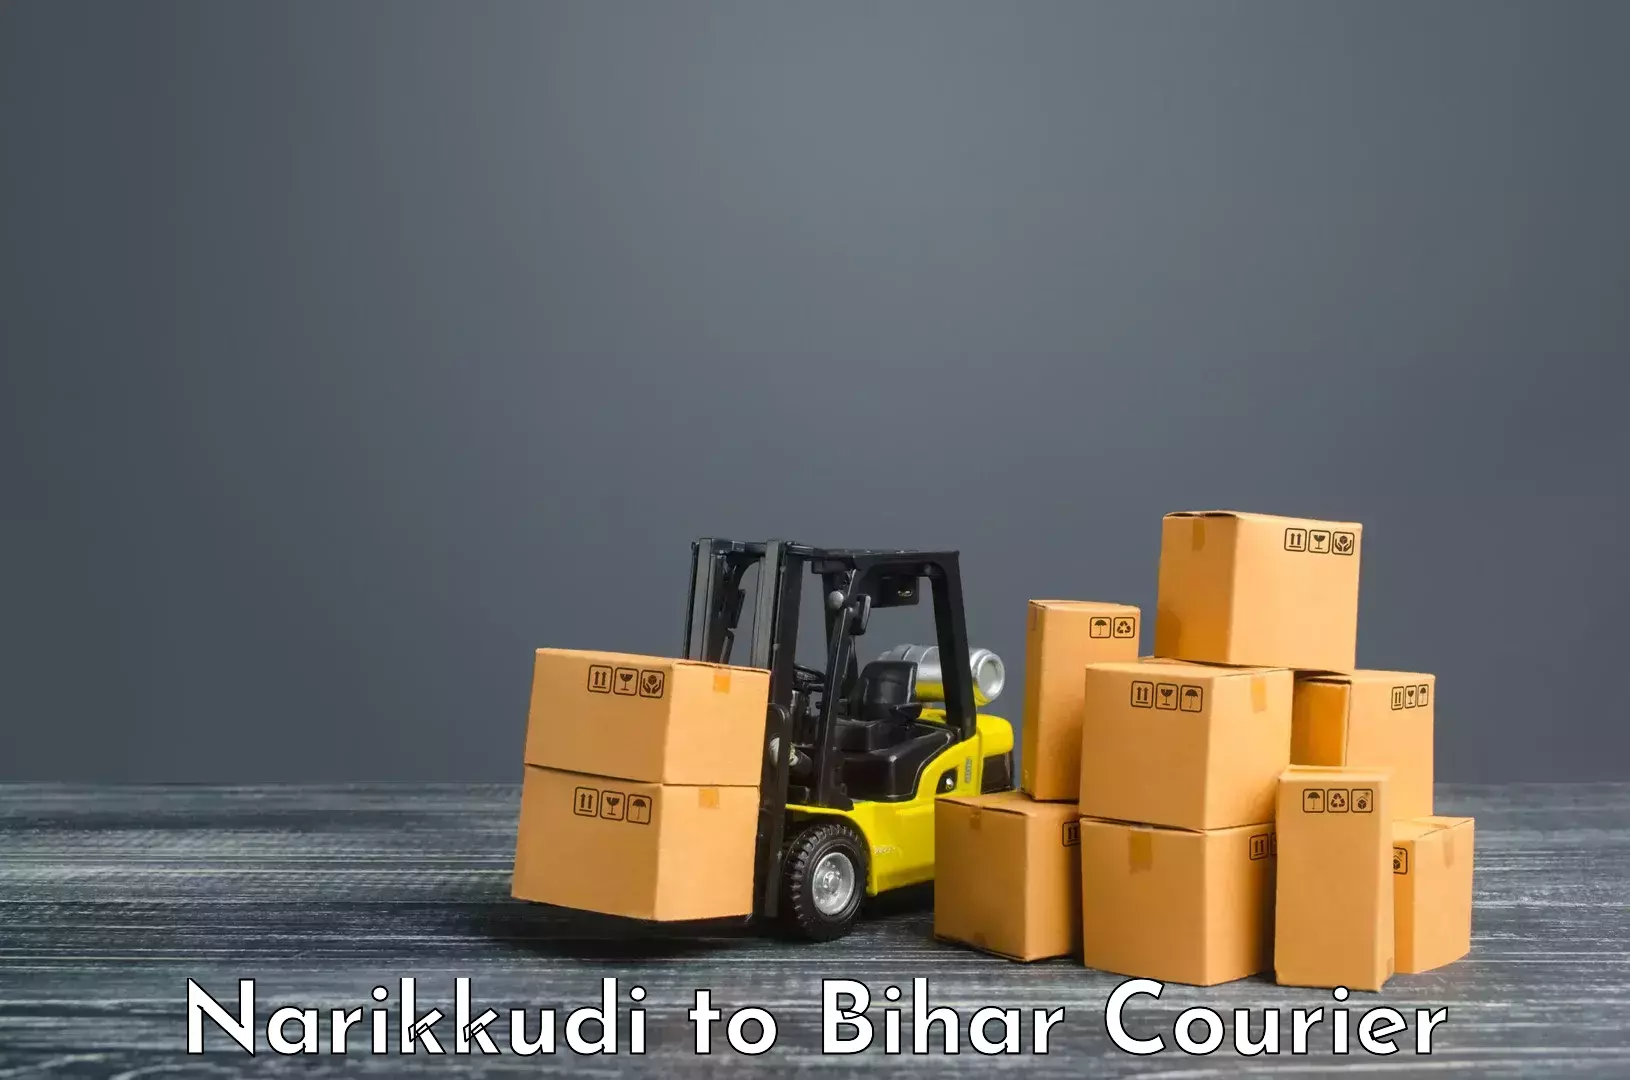 Round-the-clock parcel delivery Narikkudi to Chainpur